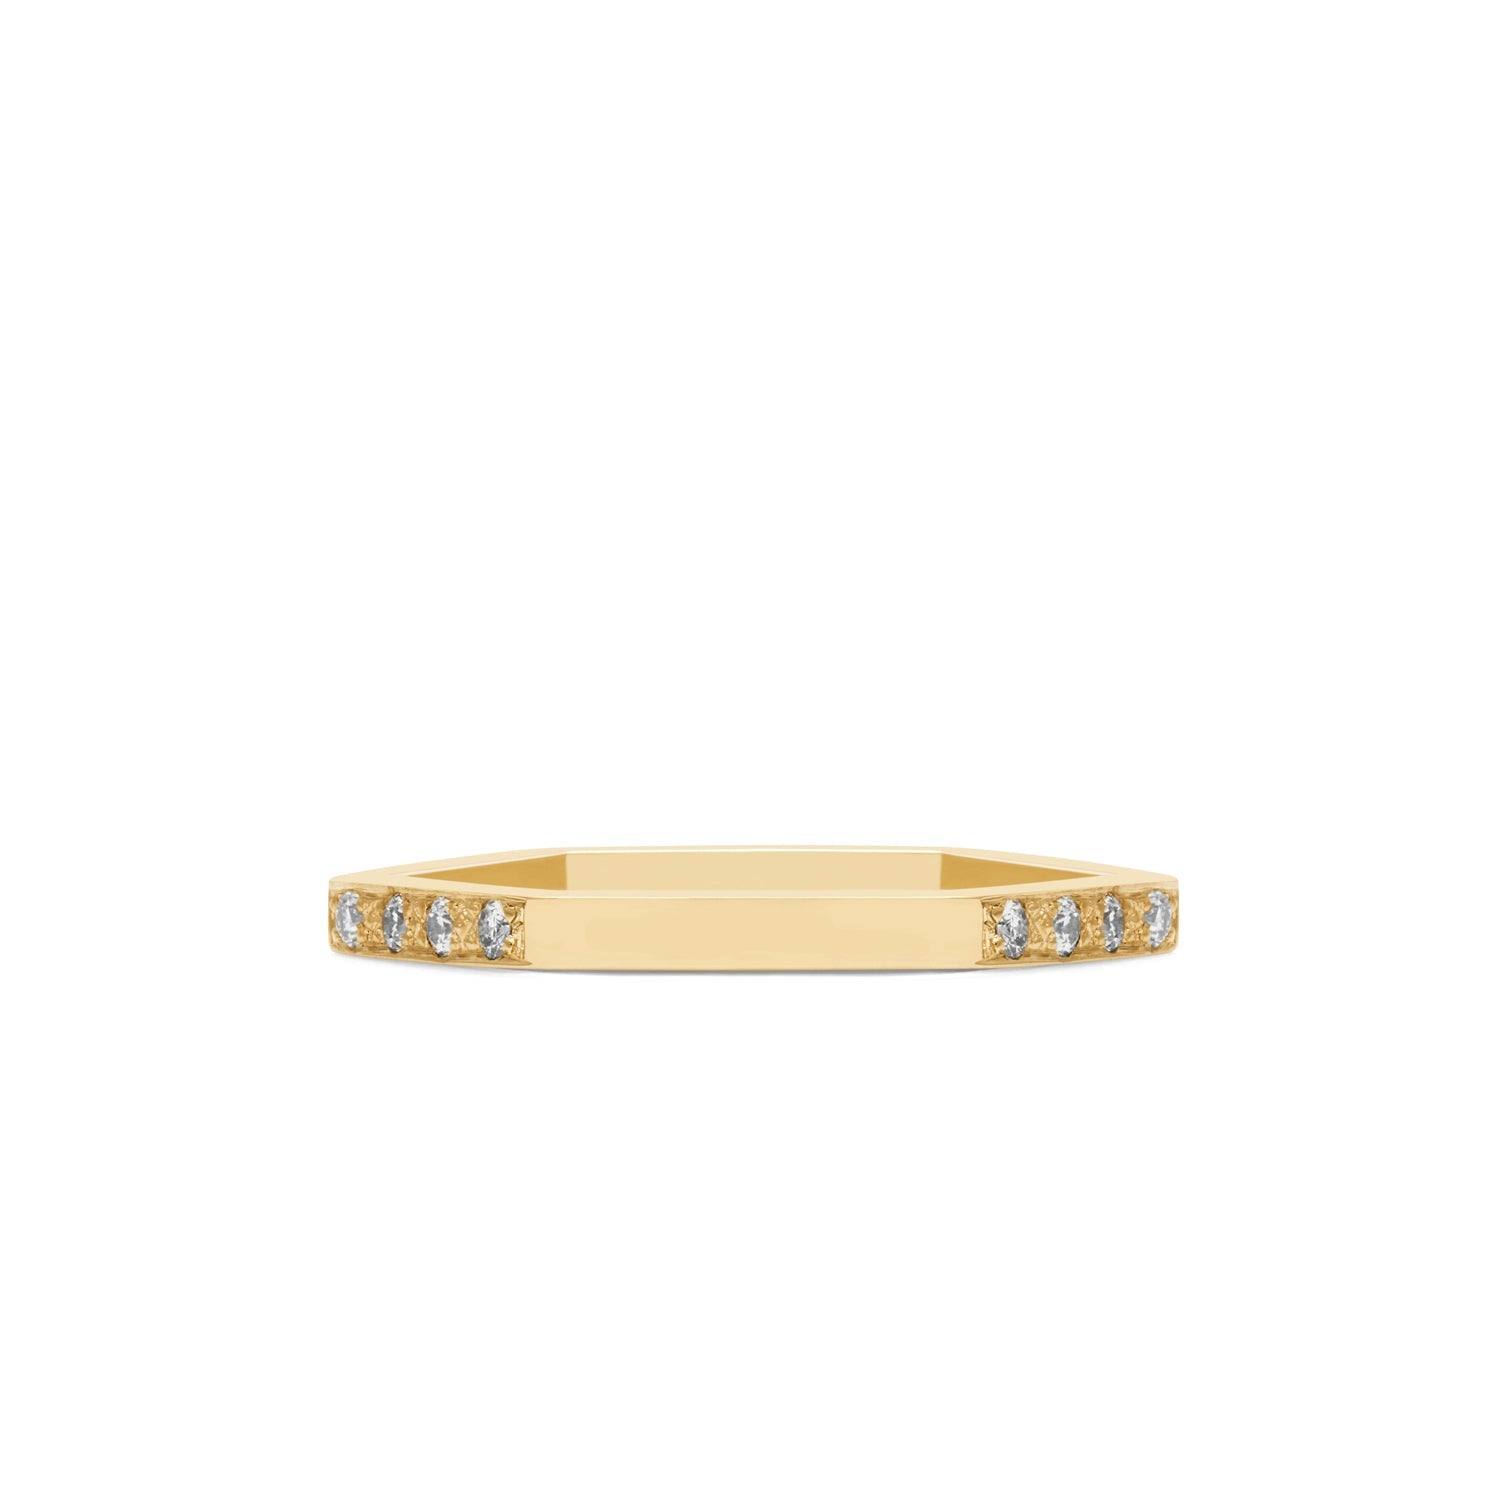 Hexagon Stack of 3 Rings with Diamonds - 18k Yellow Gold